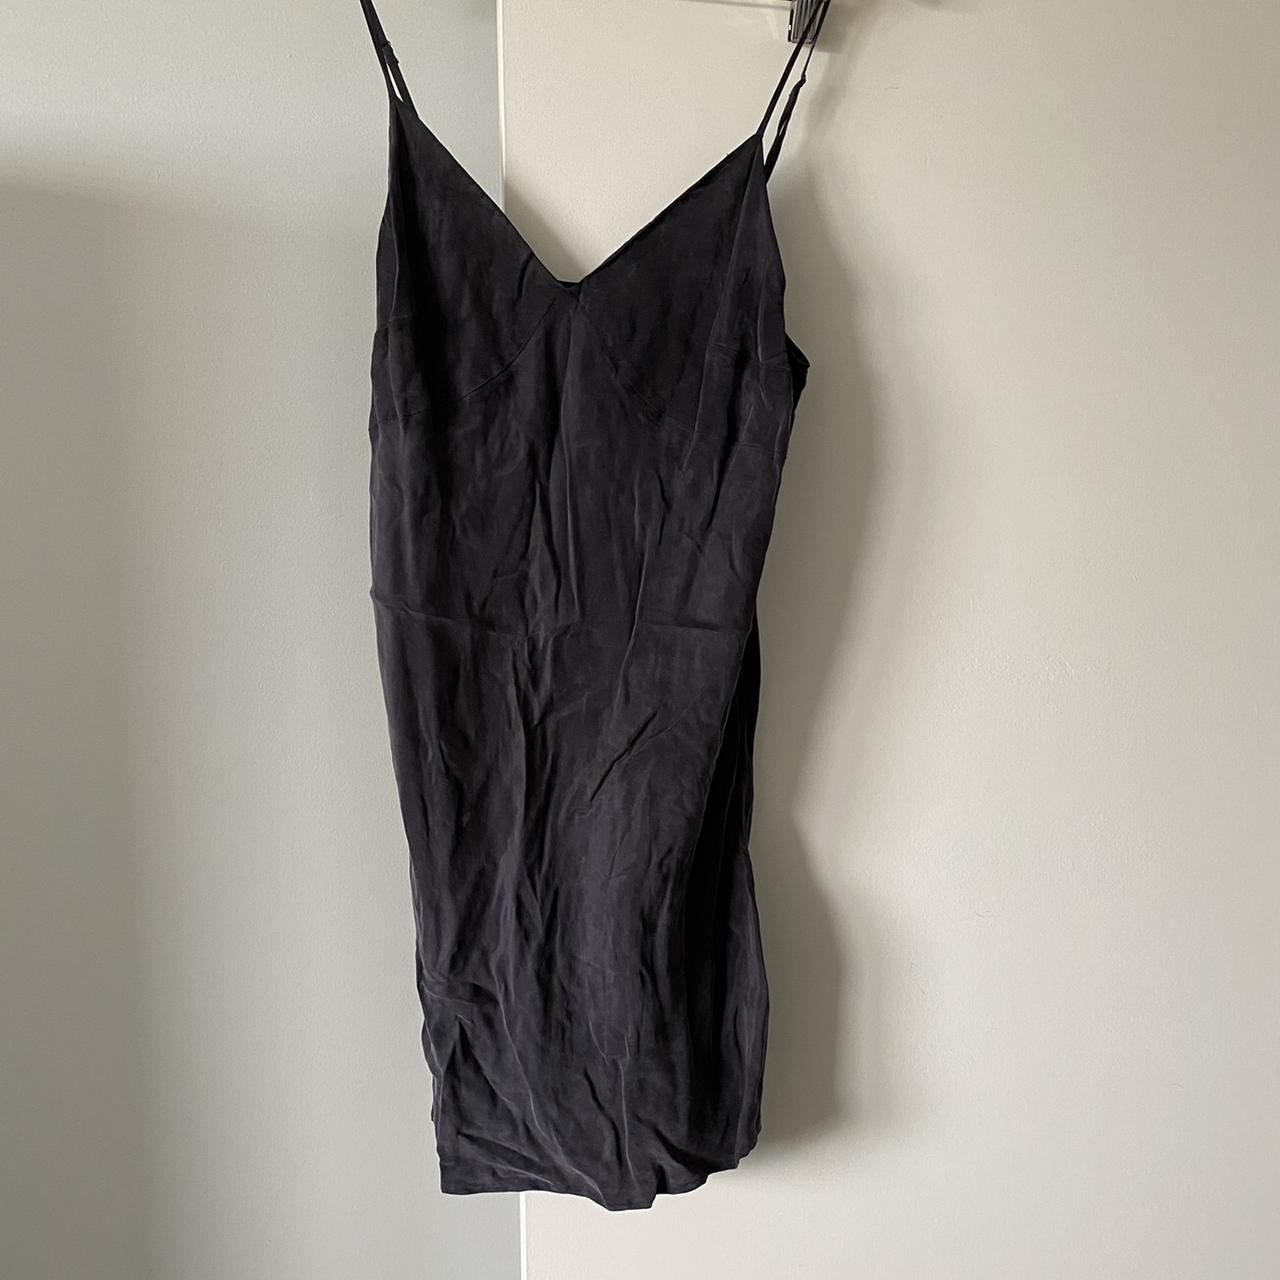 Tigerlily Cupro slip dress. 1 stain as pictured. - Depop